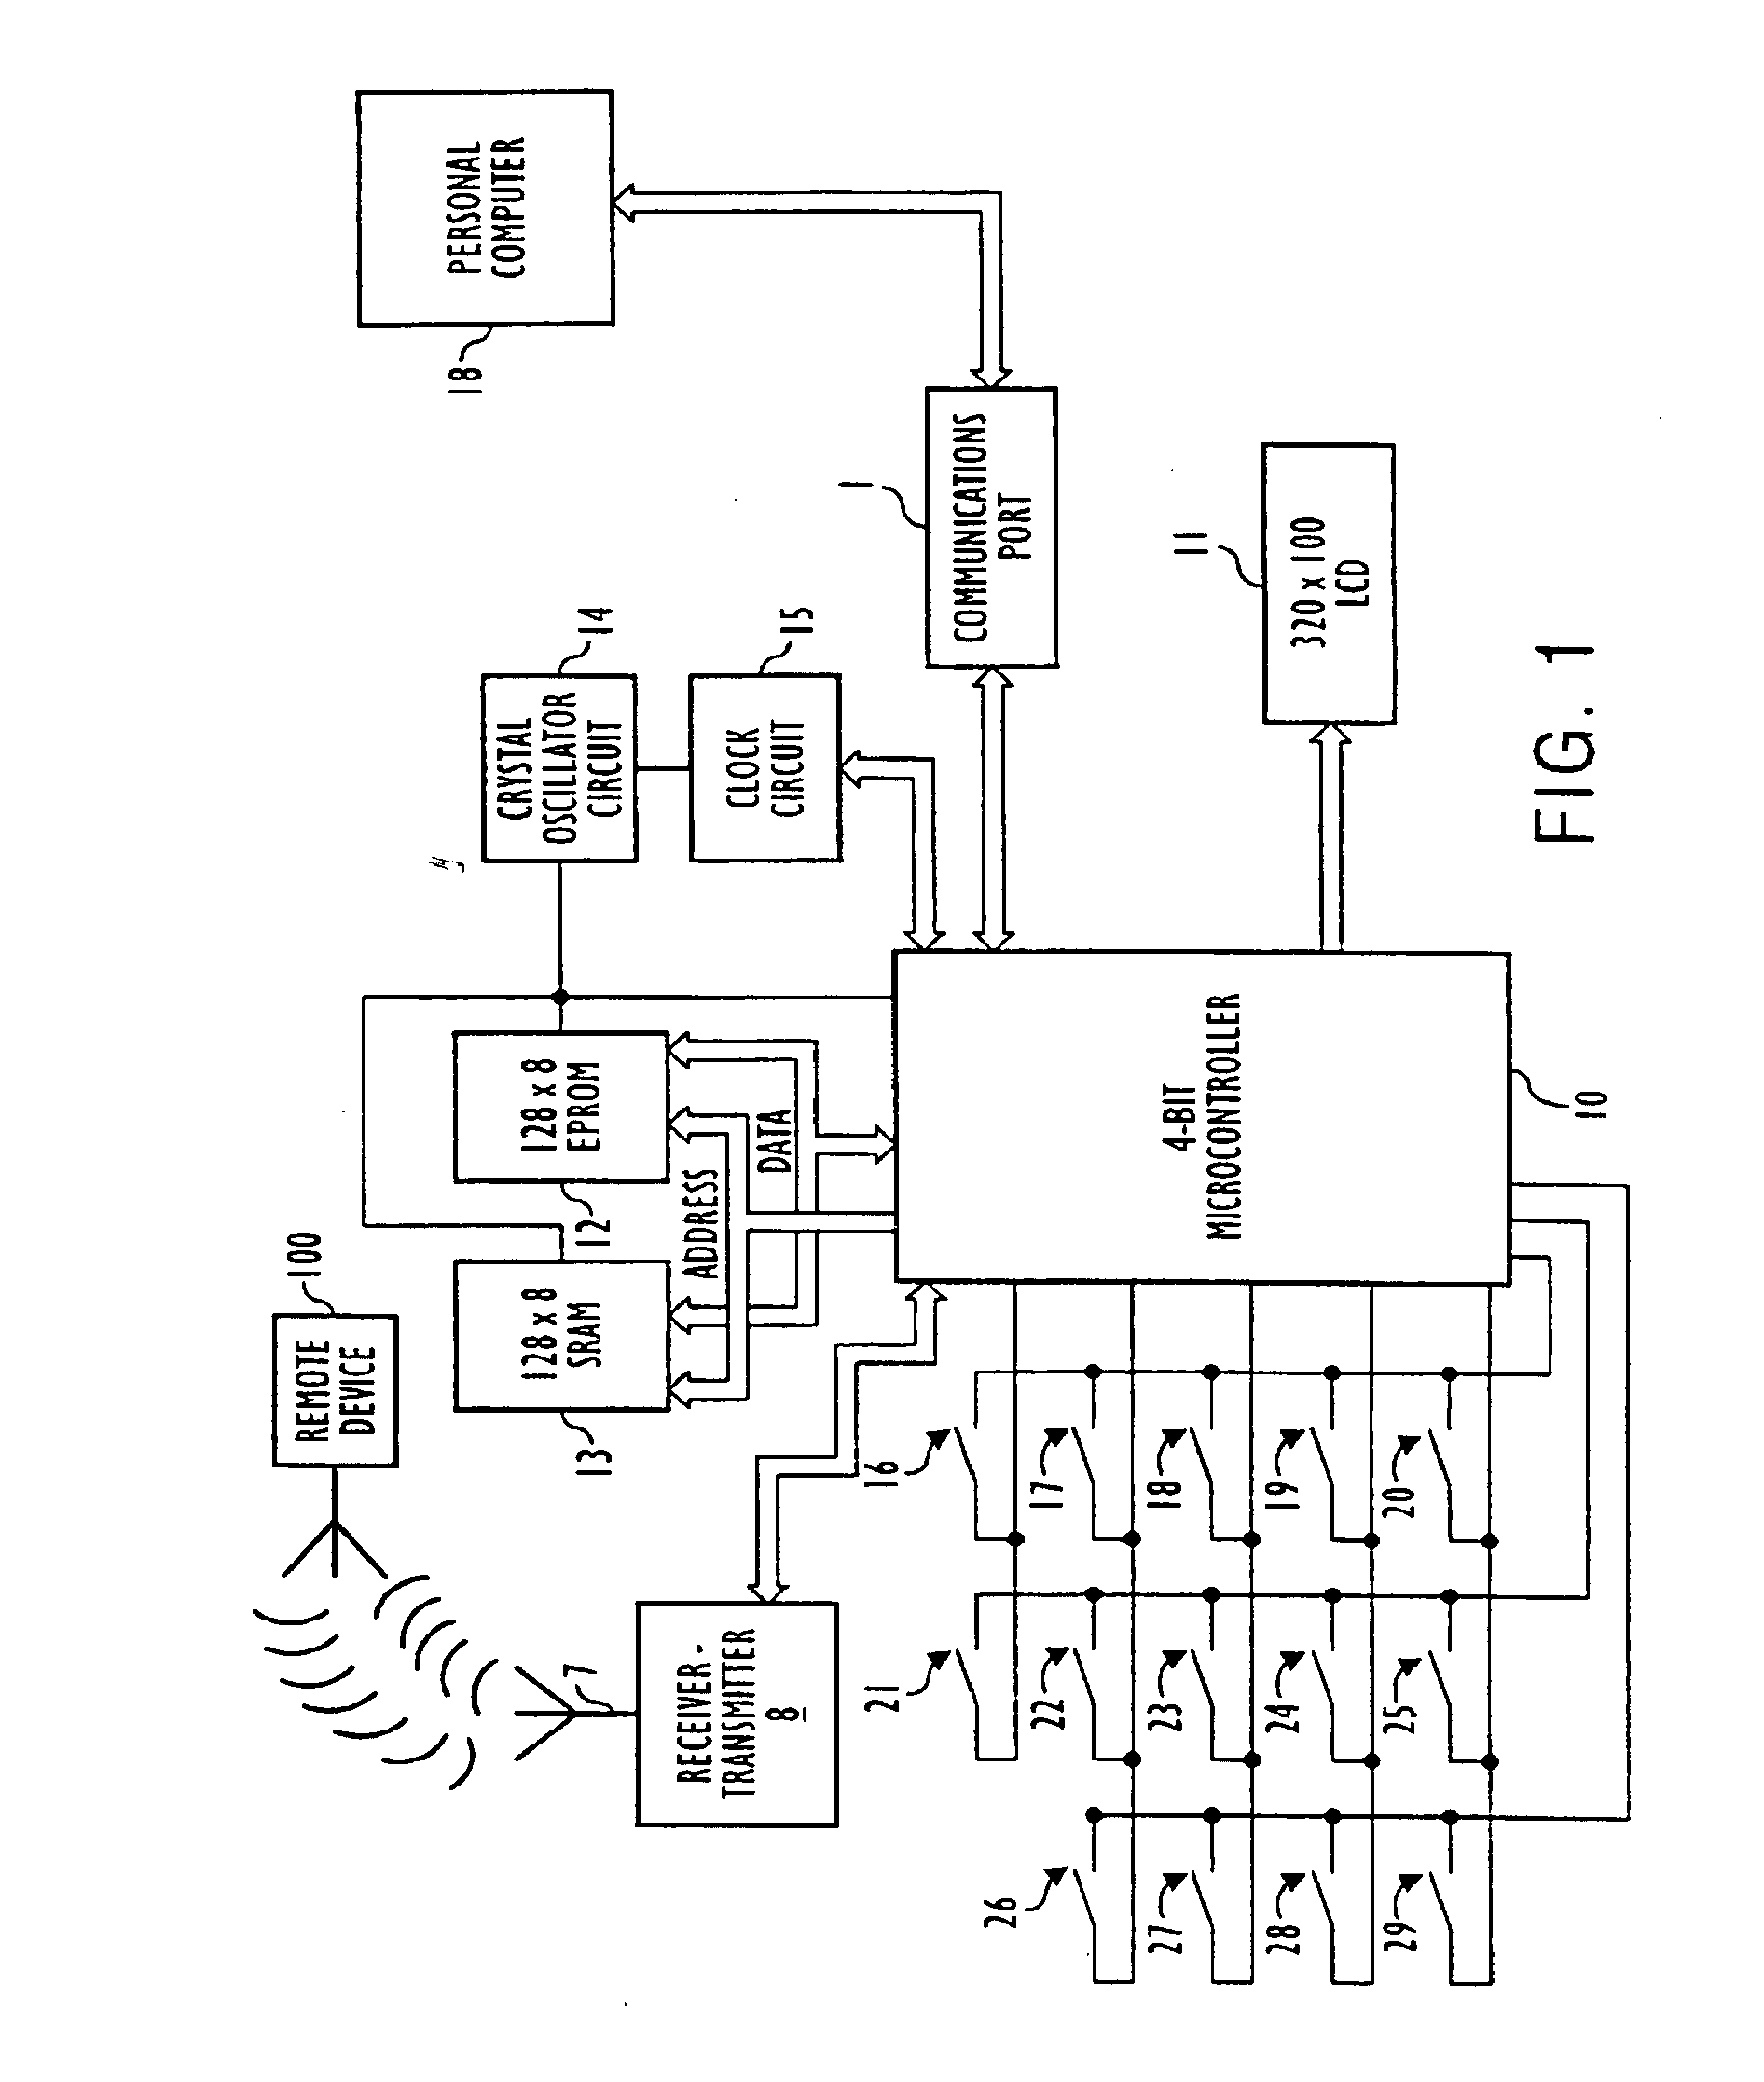 Method, apparatus, and operating system for real-time monitoring and management of patients' health status and medical treatment regimens